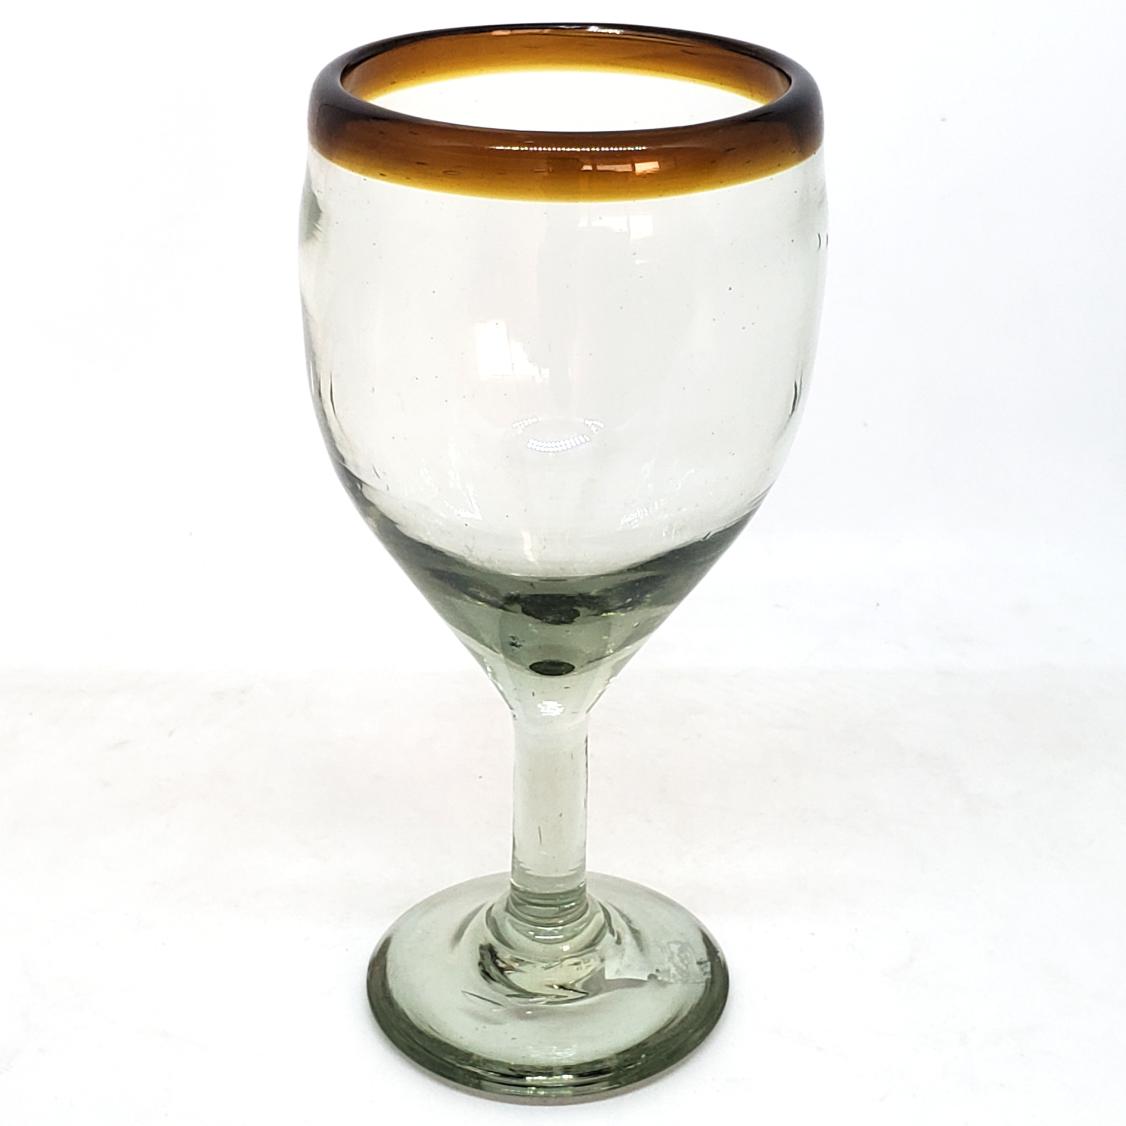 Wholesale Colored Rim Glassware / Amber Rim 13 oz Wine Glasses  / Capture the bouquet of fine red wine with these wine glasses bordered with a bright, amber rim.